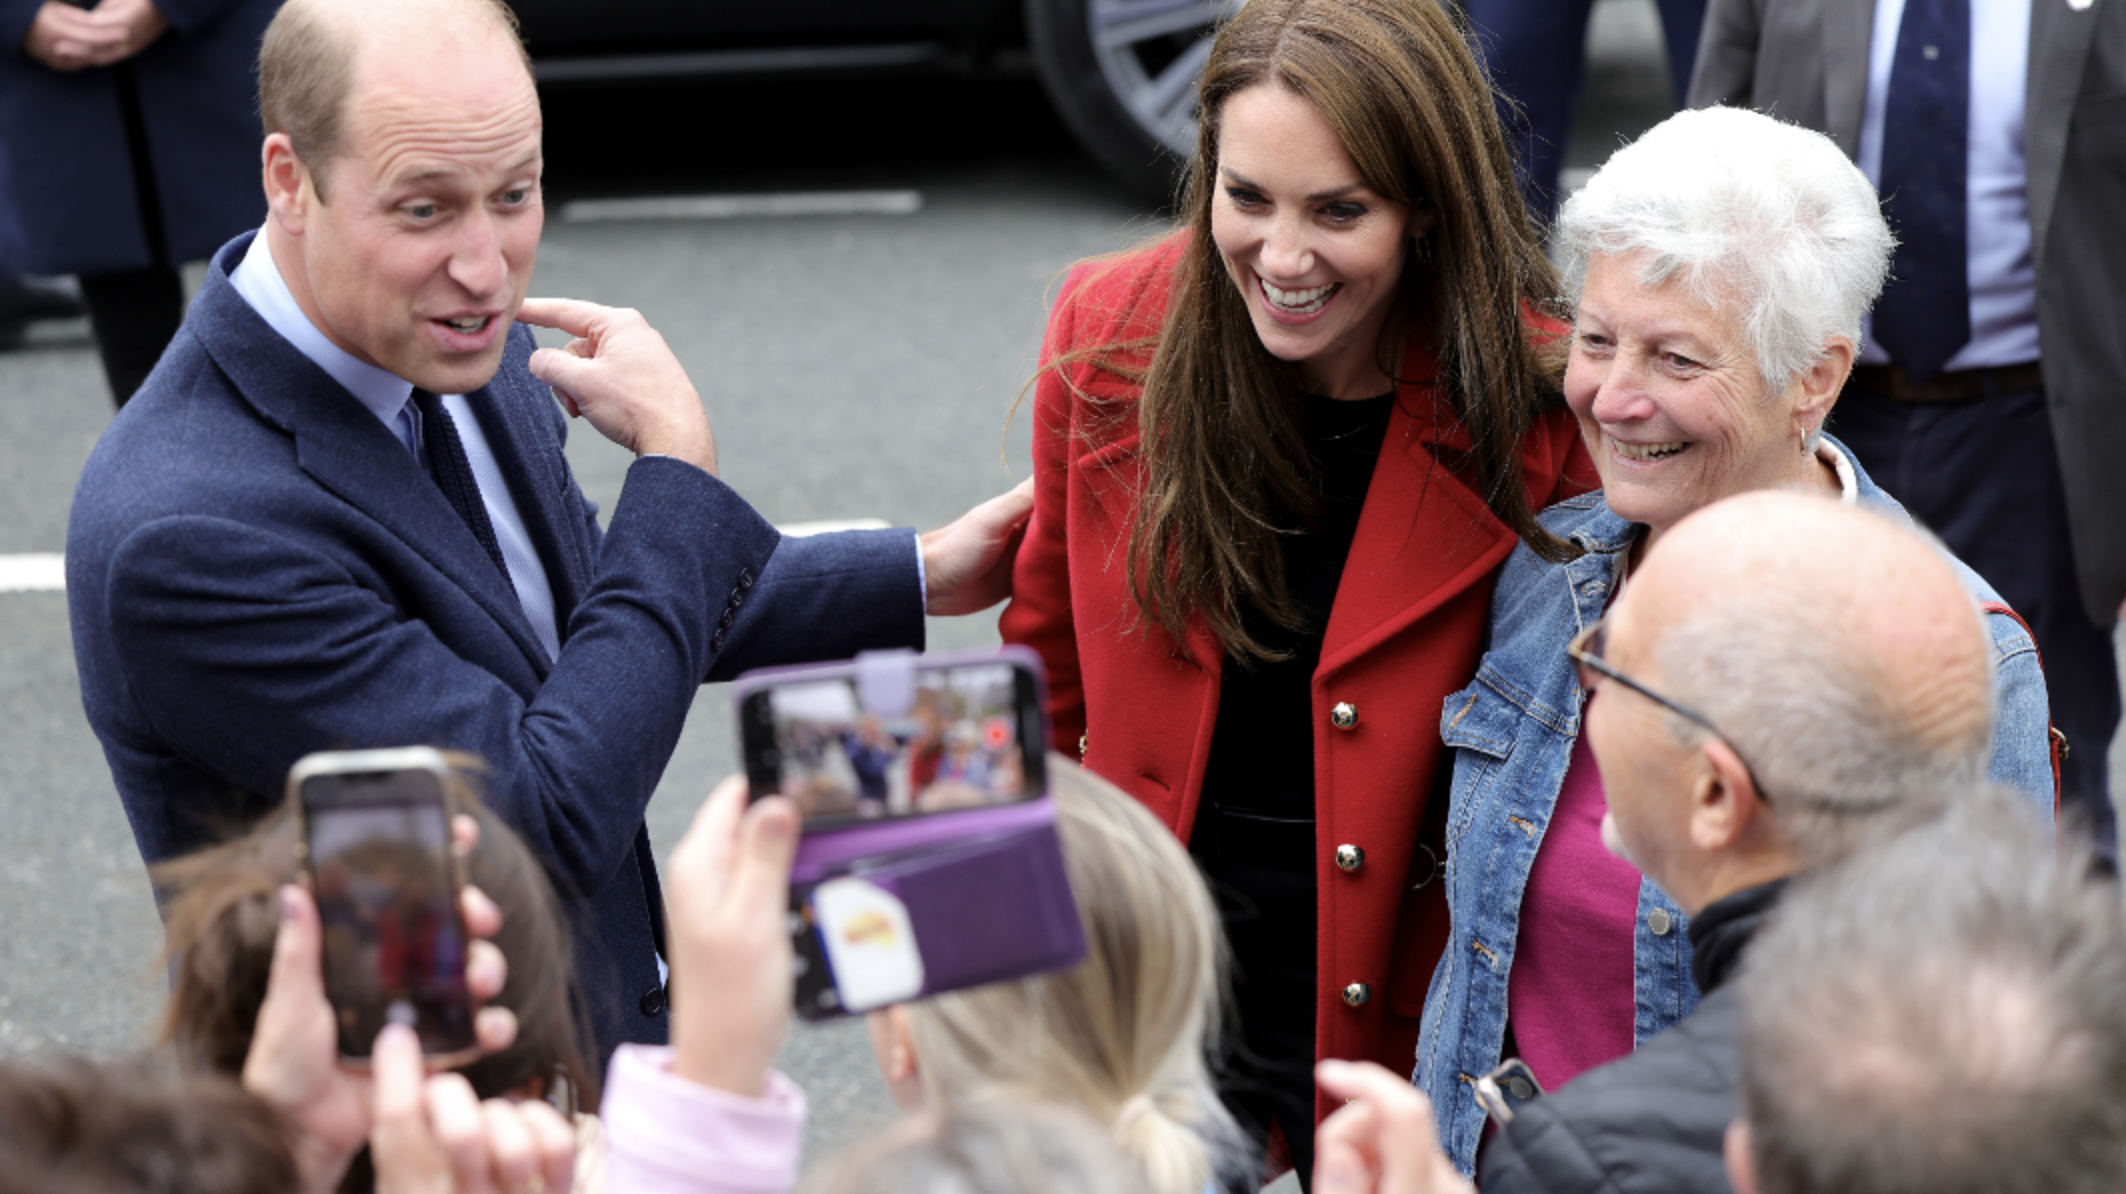 A Royal Fan Told Prince William and Princess Kate That Princess Diana Would Be Proud of Them